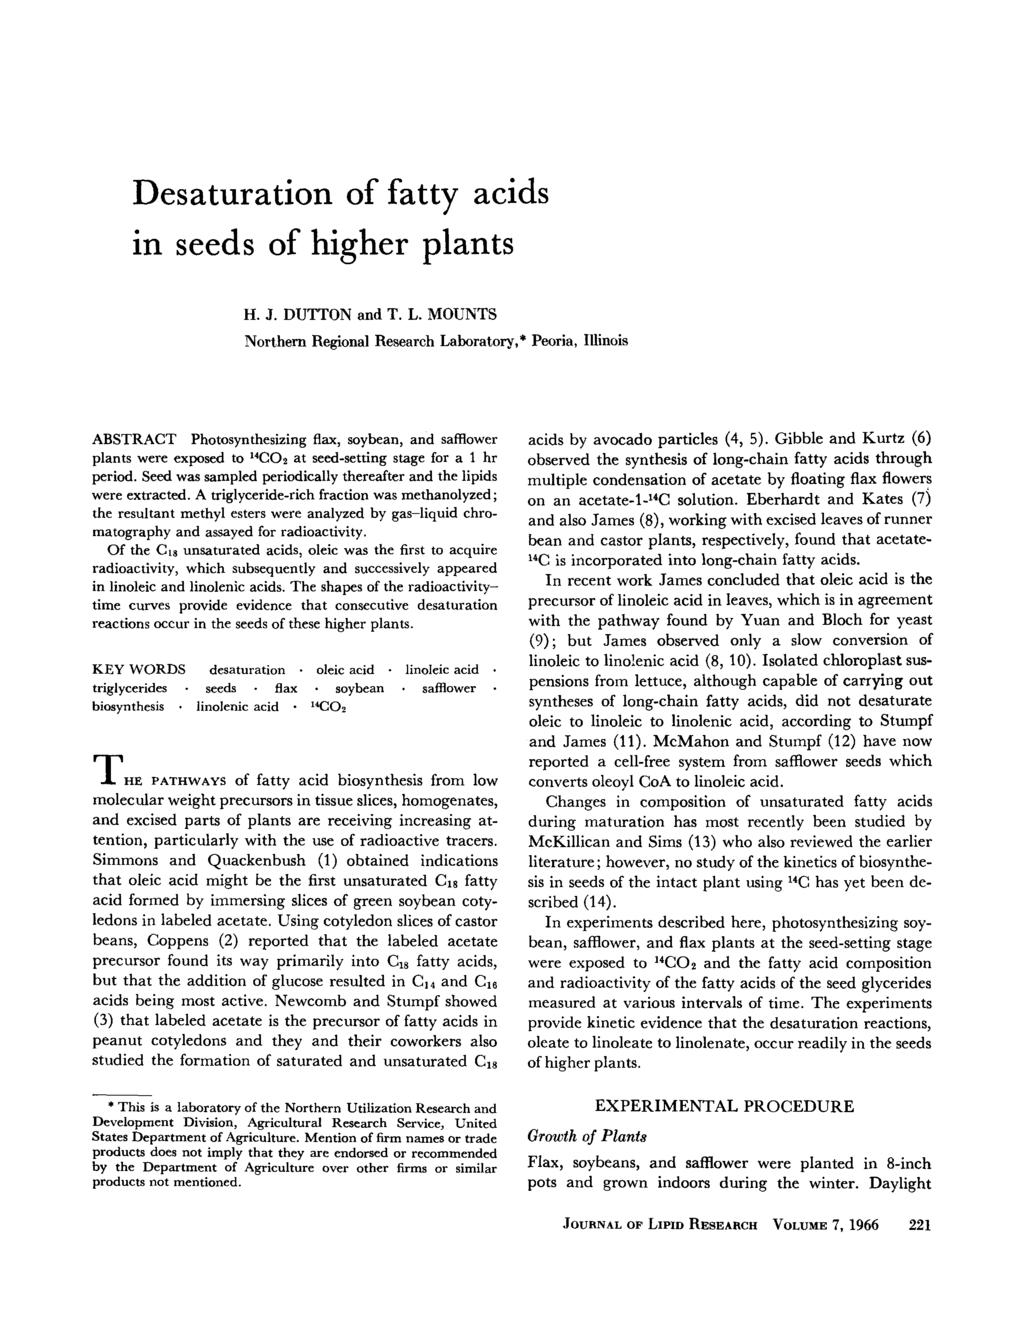 Desaturation of fattv acids in seeds of higher plants H. J. DUTTON and T. L.